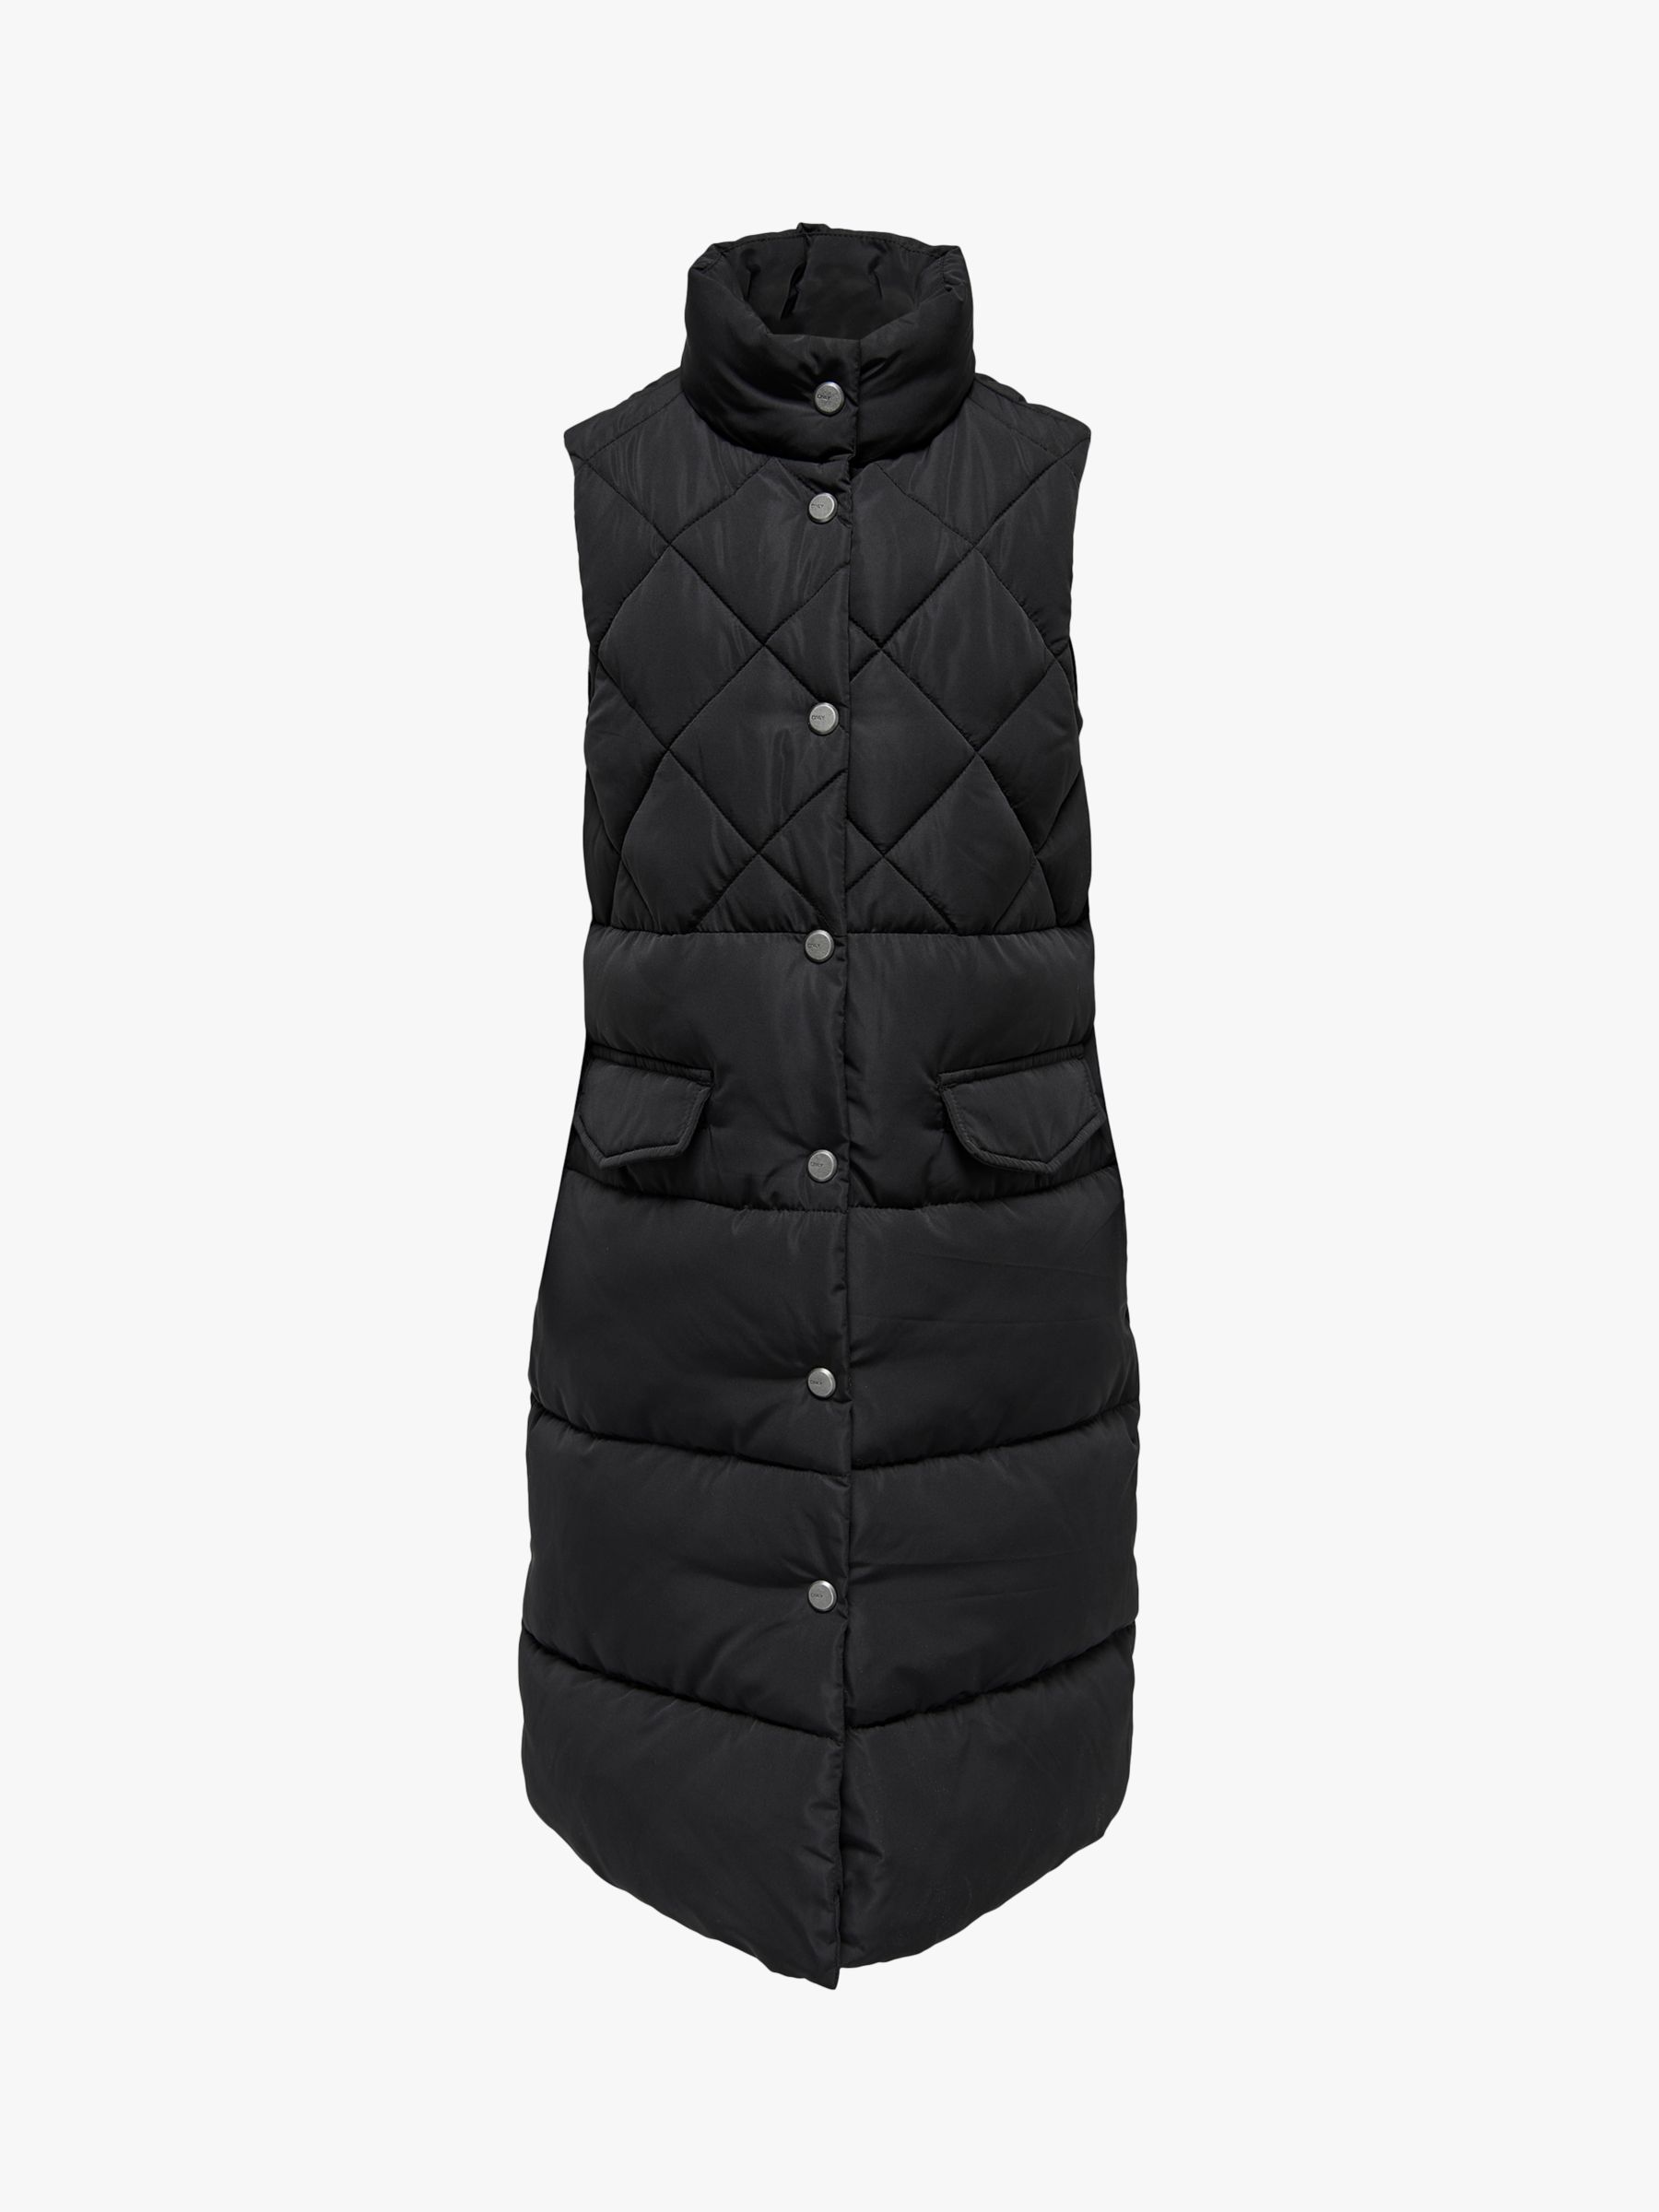 ONLY Kids' Outerwear Quilted Waistcoat, Black at John Lewis & Partners